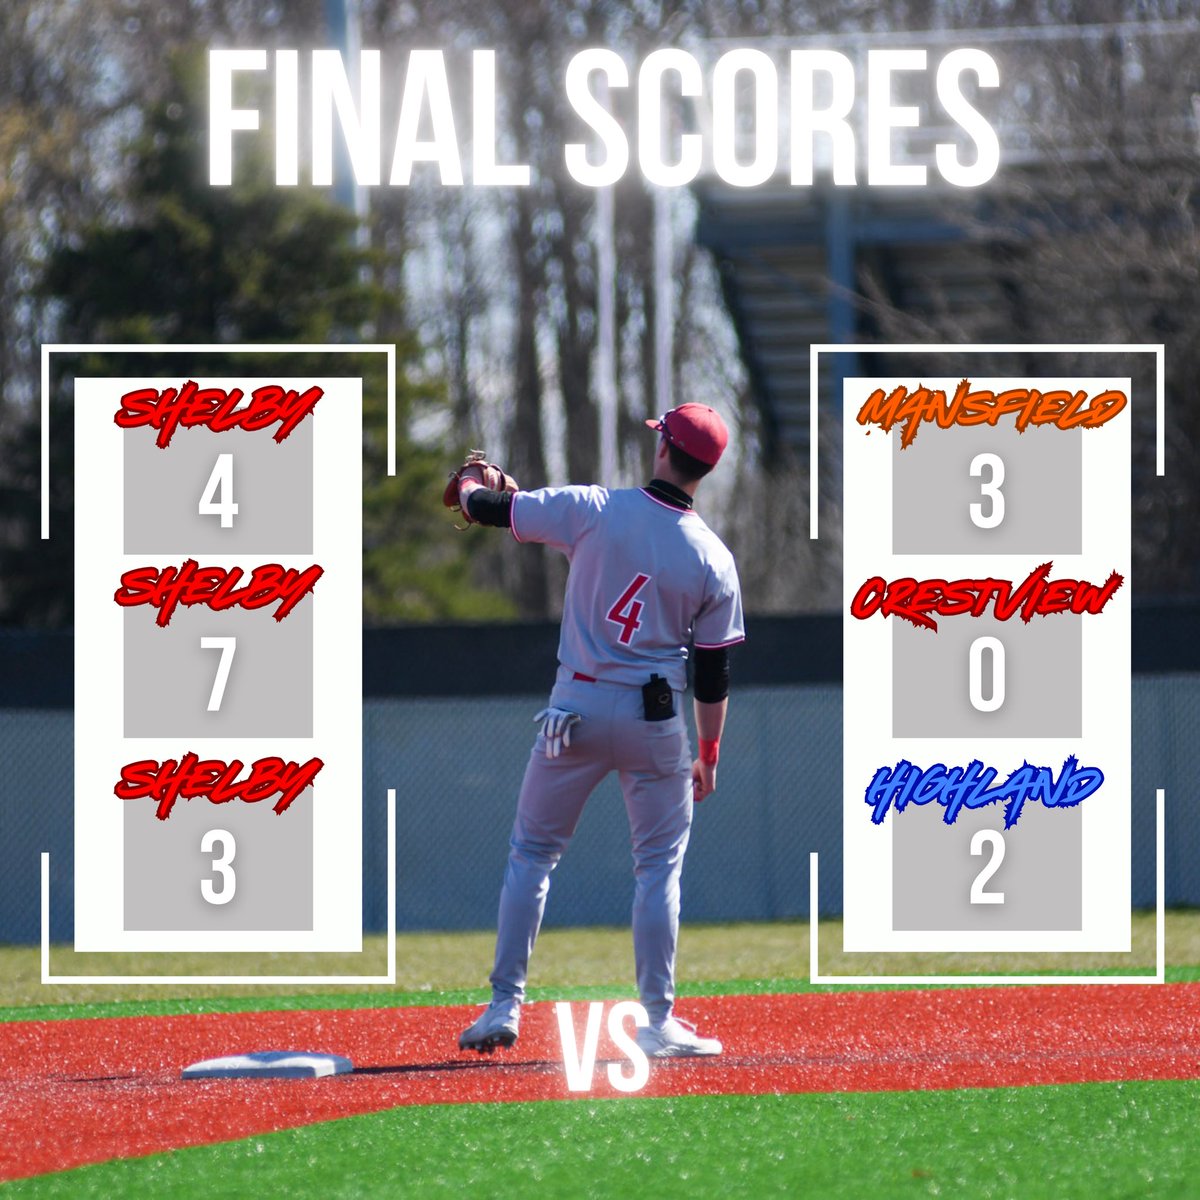 Shelby Baseball Weekend Recap 🎉: 
Fri: Beat Mansfield Senior 4-3 ⚾️
Sat: Travis Slone's 1-hitter led to a 7-0 win over Crestview 🔥
Today: Nic Eyster's walk-off hit clinches victory against Highland! 🏆 
Tomorrow, it's round two against Highland! #ShelbyBaseball #WinningWeekend